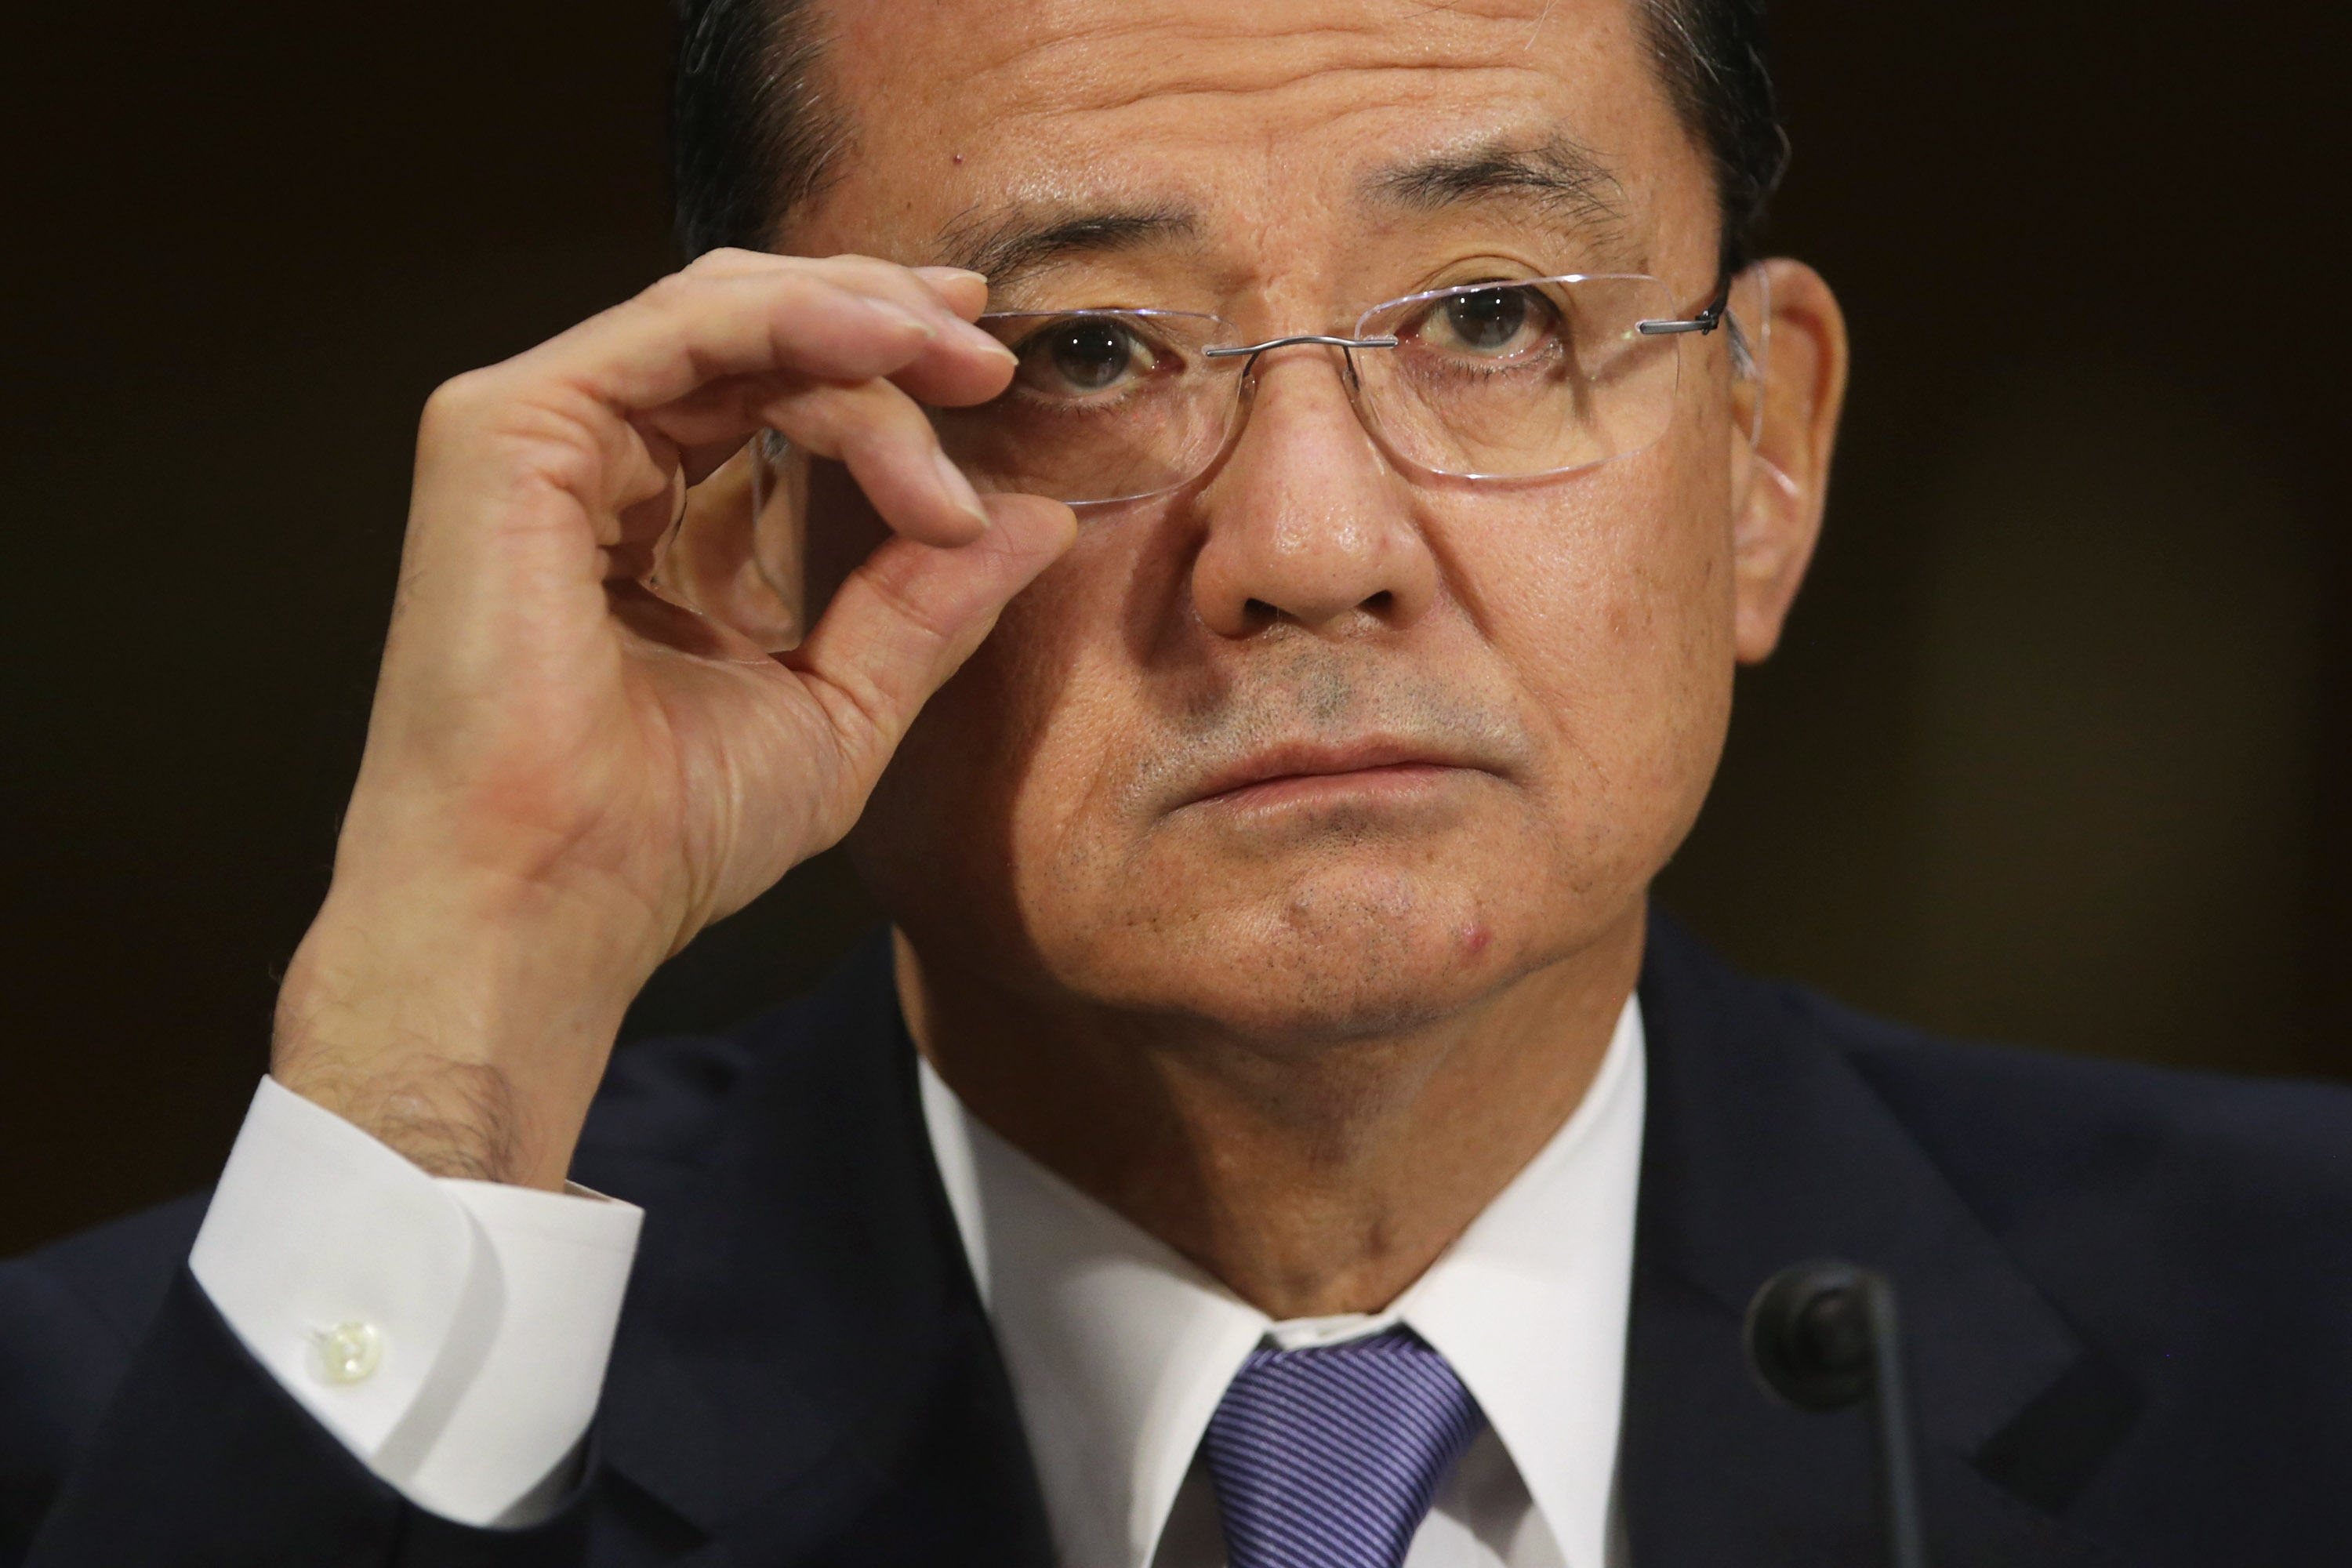 U.S. Veterans Affairs Secretary Eric Shinseki testifies before the Senate Veterans' Affairs Committee about wait times veterans face  to get medical care May 15, 2014 in Washington, DC. (Chip Somodevilla&mdash;Getty Images)